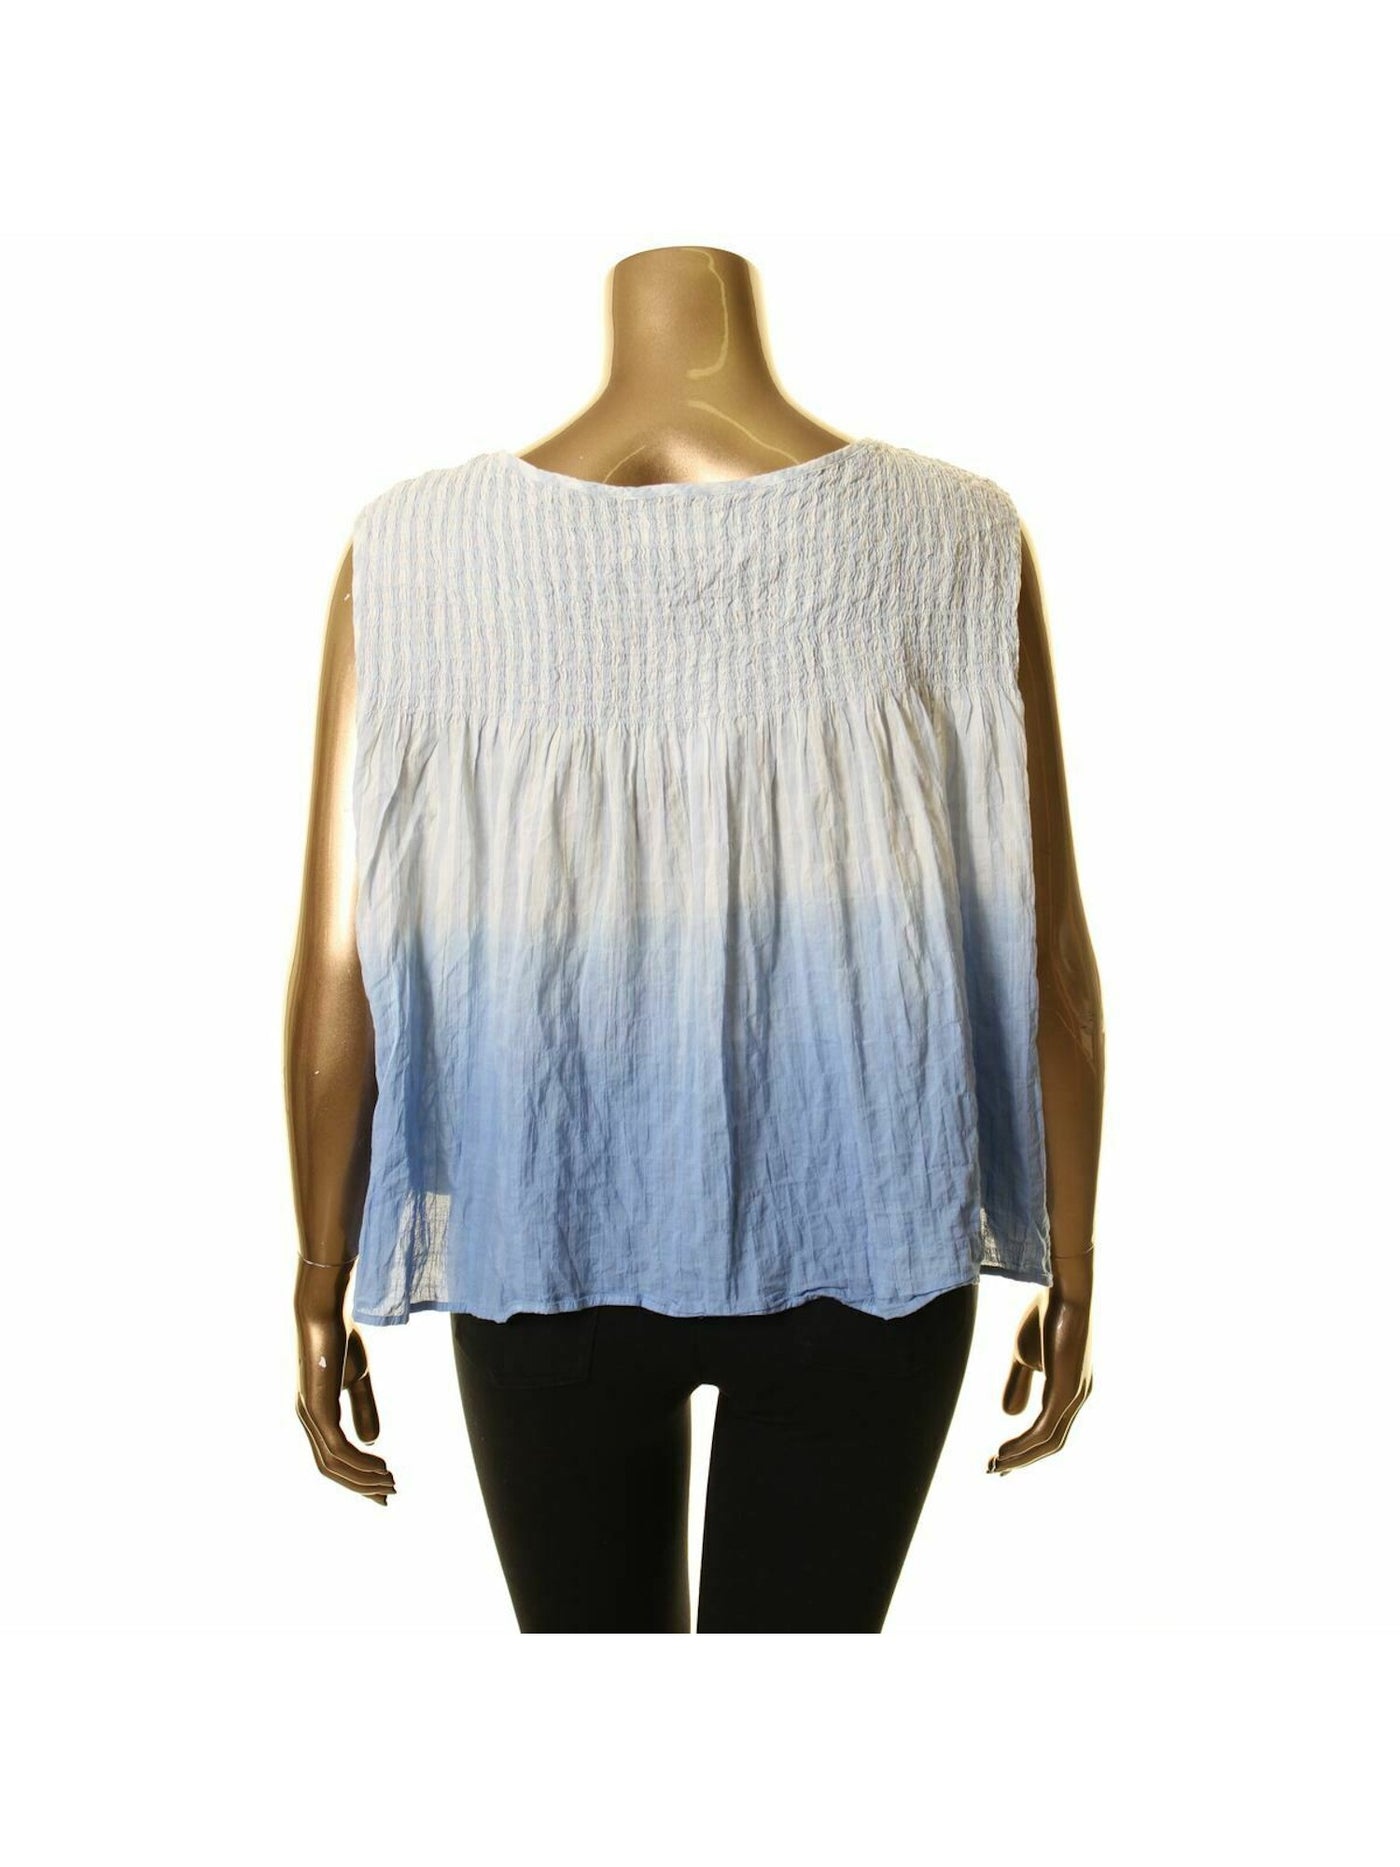 FREE PEOPLE Womens Cotton Ruffled Sleeveless Henley Peasant Top